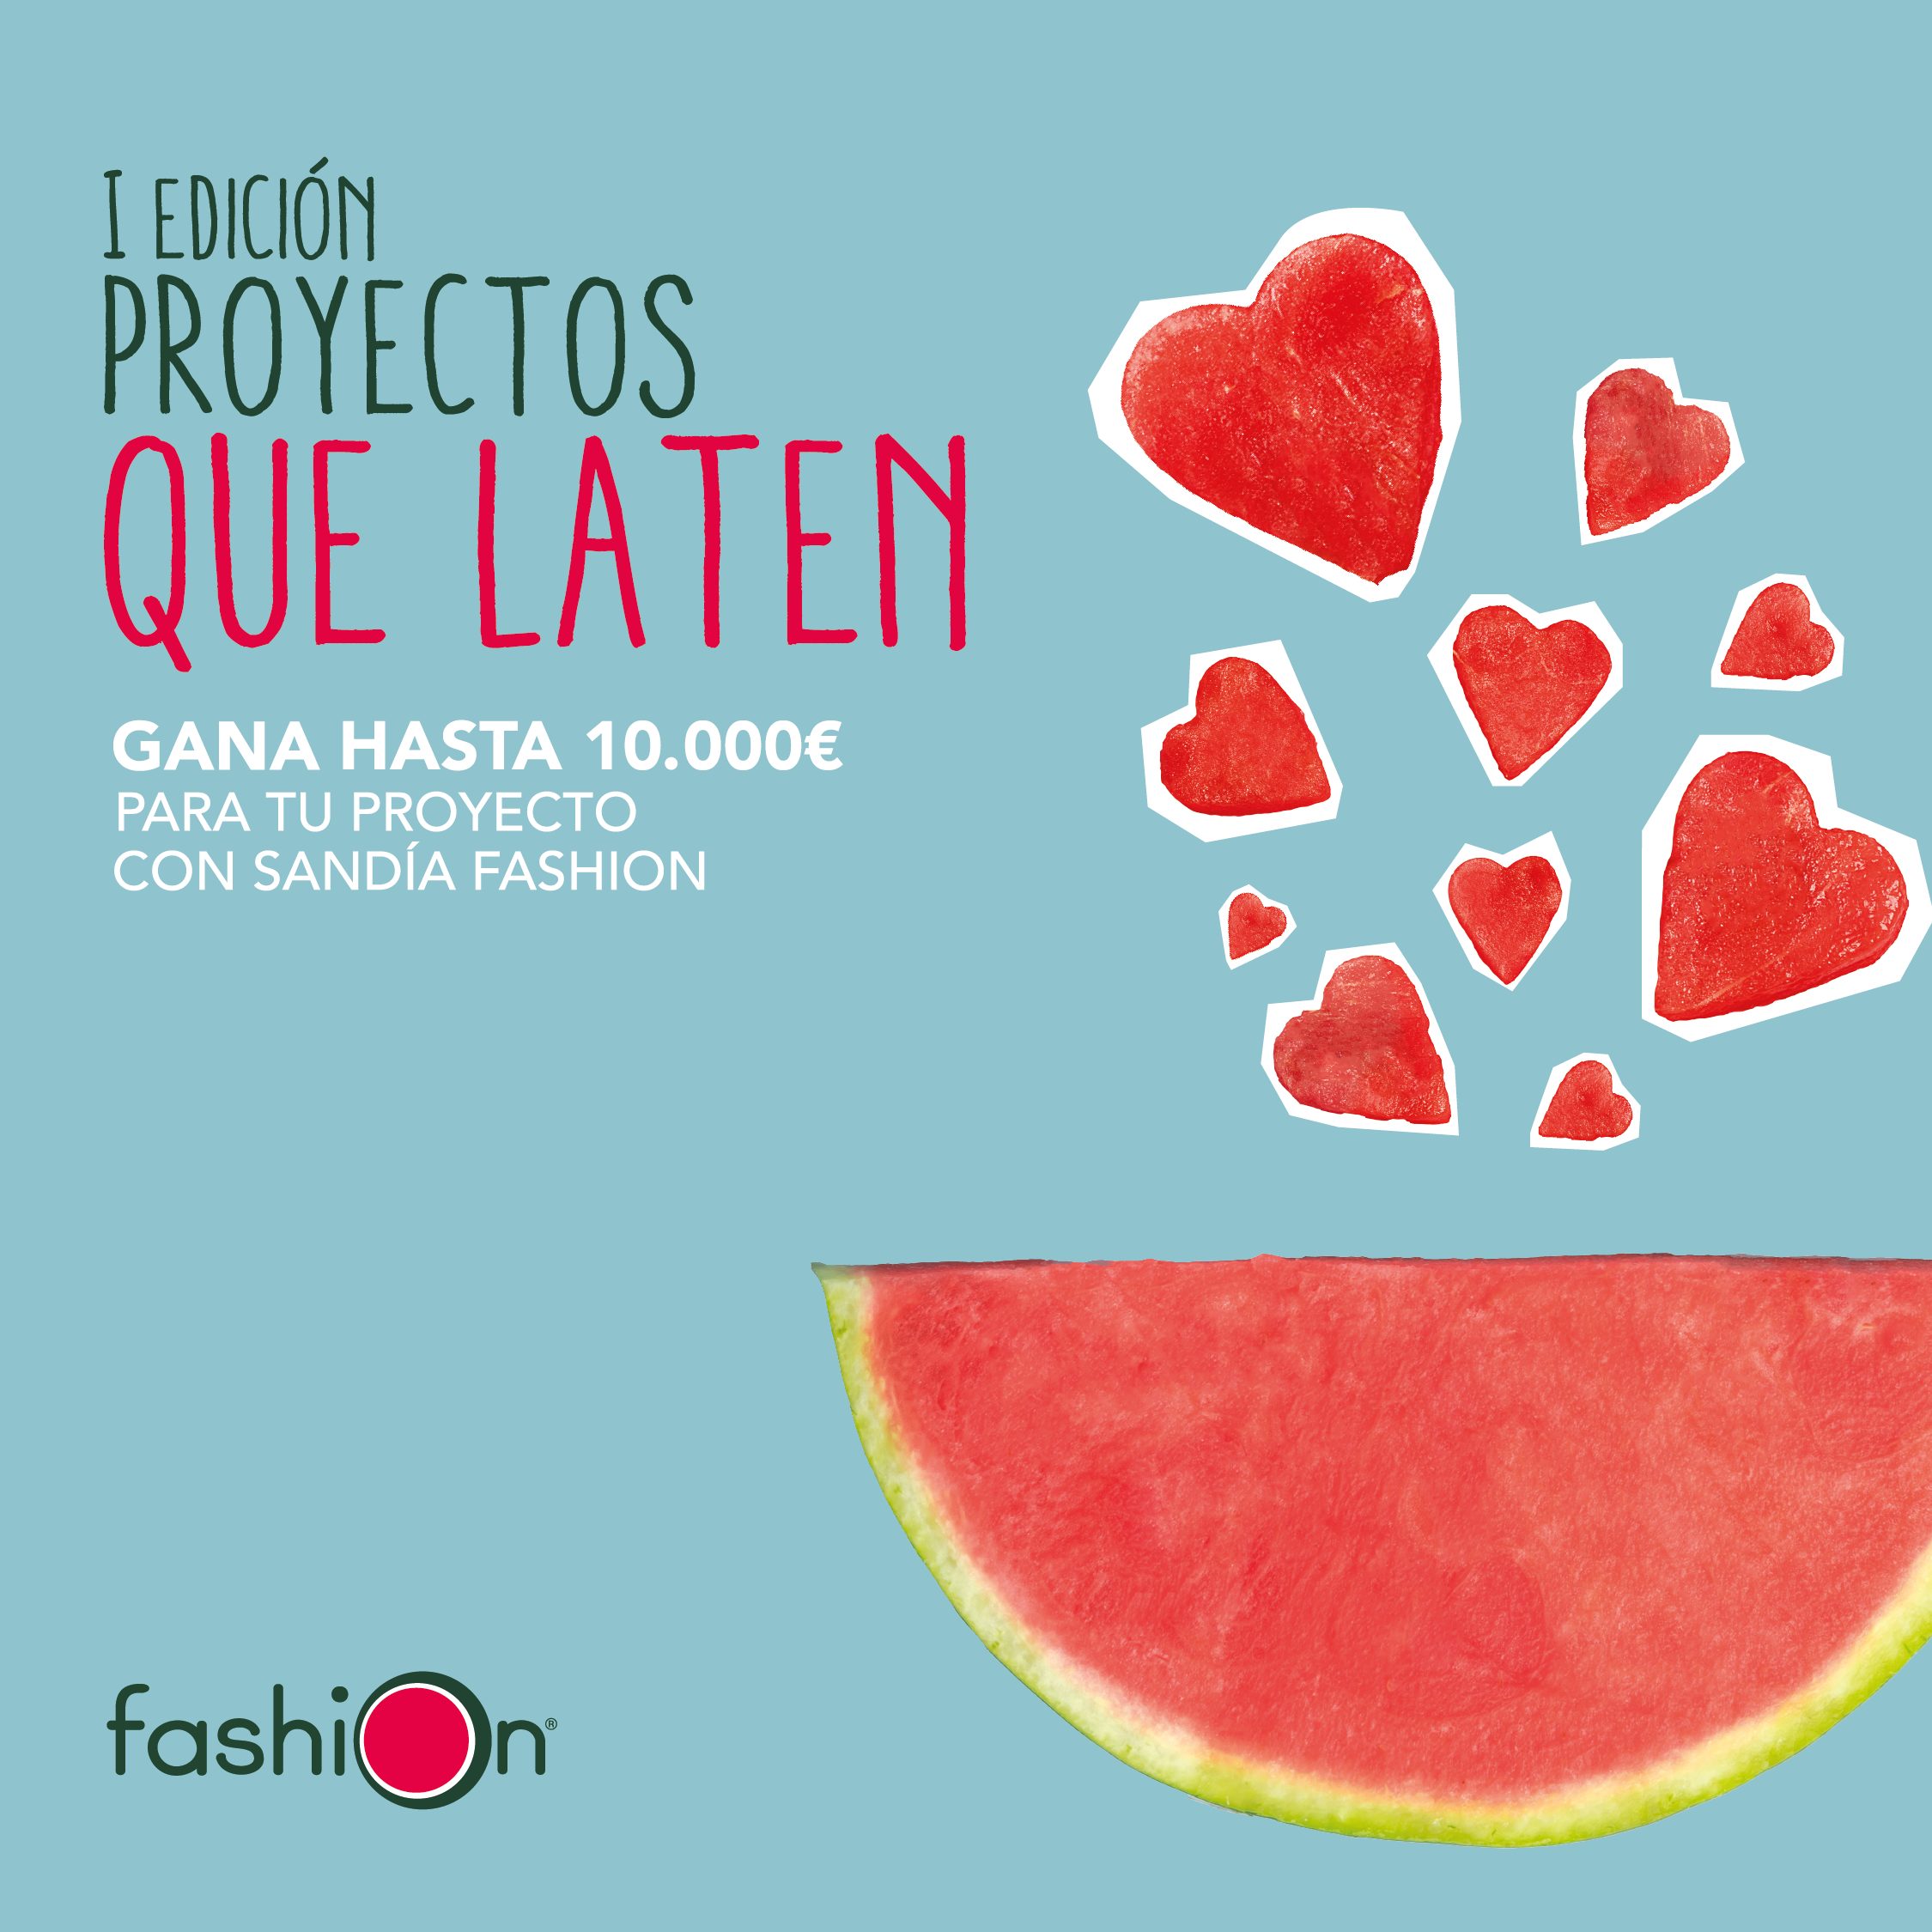 Sandía Fashion® launches TODAY its solidarity project, the 1st Edition of “Proyectos Que Laten” to make visible the initiatives that put heart to life.